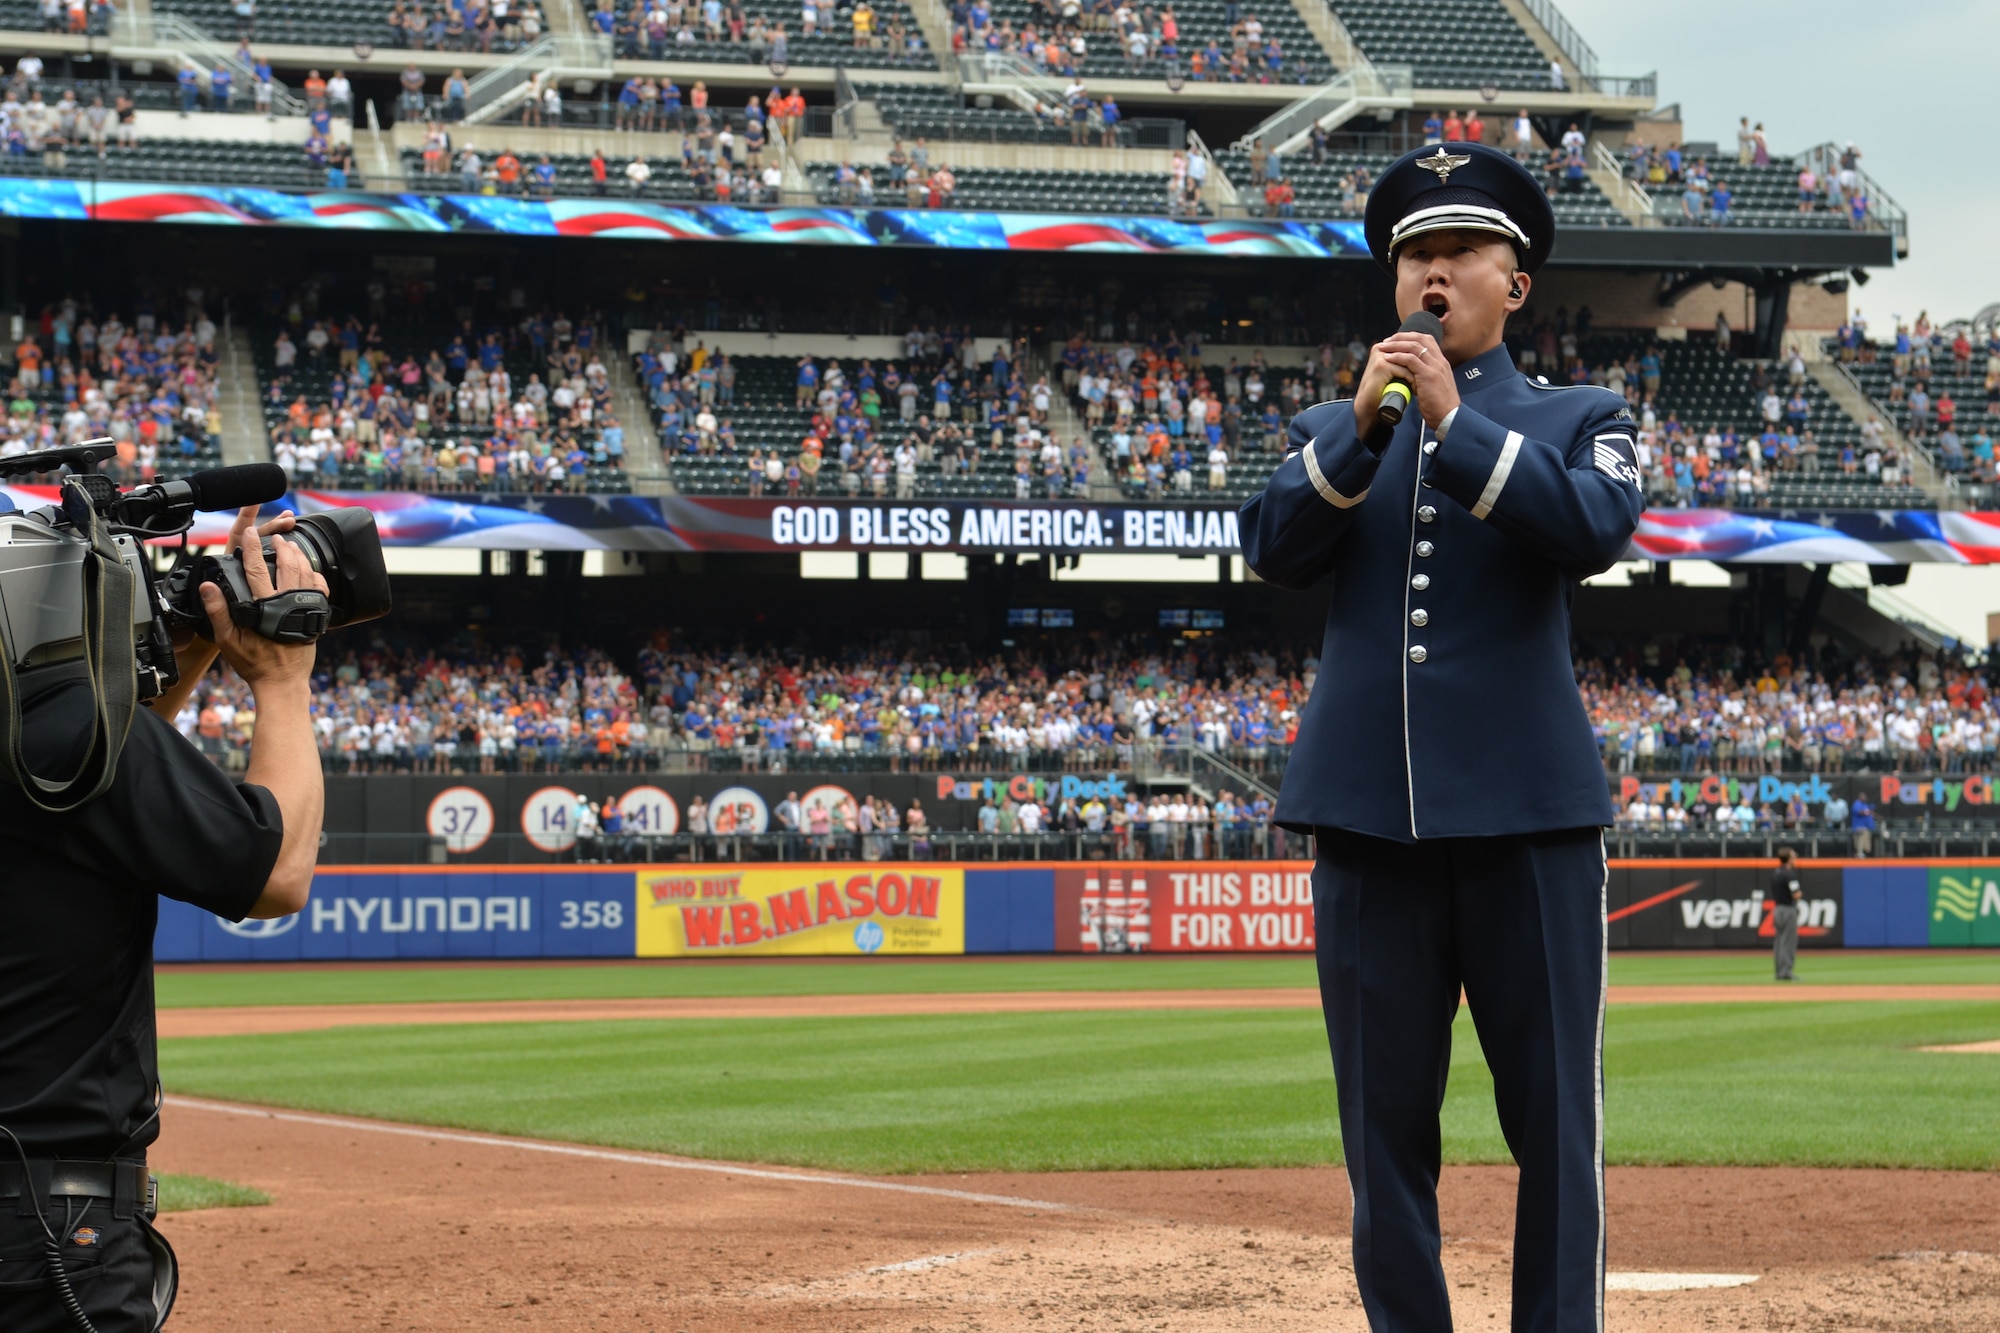 MSgt. Benjamin Parks performs God Bless America at New York City’s Citi Field on July 2, 2015 during the seventh inning stretch at the Mets’ game. This performance was part of a larger five-day tour in New York City to represent the Air Force on the nation's birthday (U.S. Air Force photo/1Lt. Esther Willett).